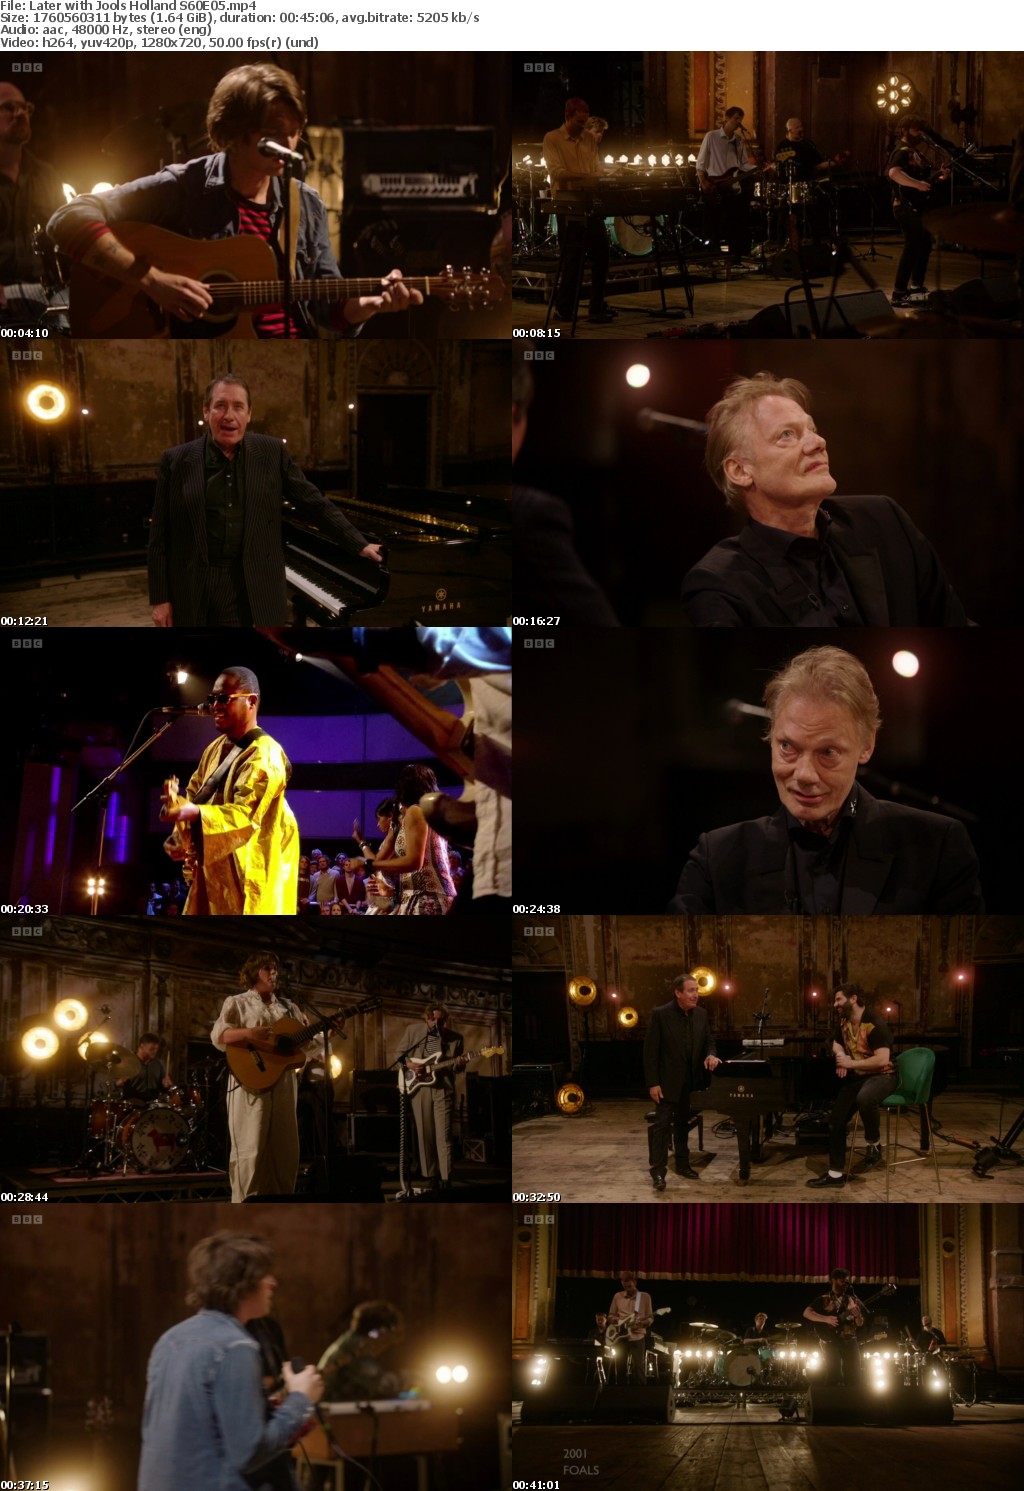 Later with Jools Holland S60E05 (1280x720p HD, 50fps, soft Eng subs)